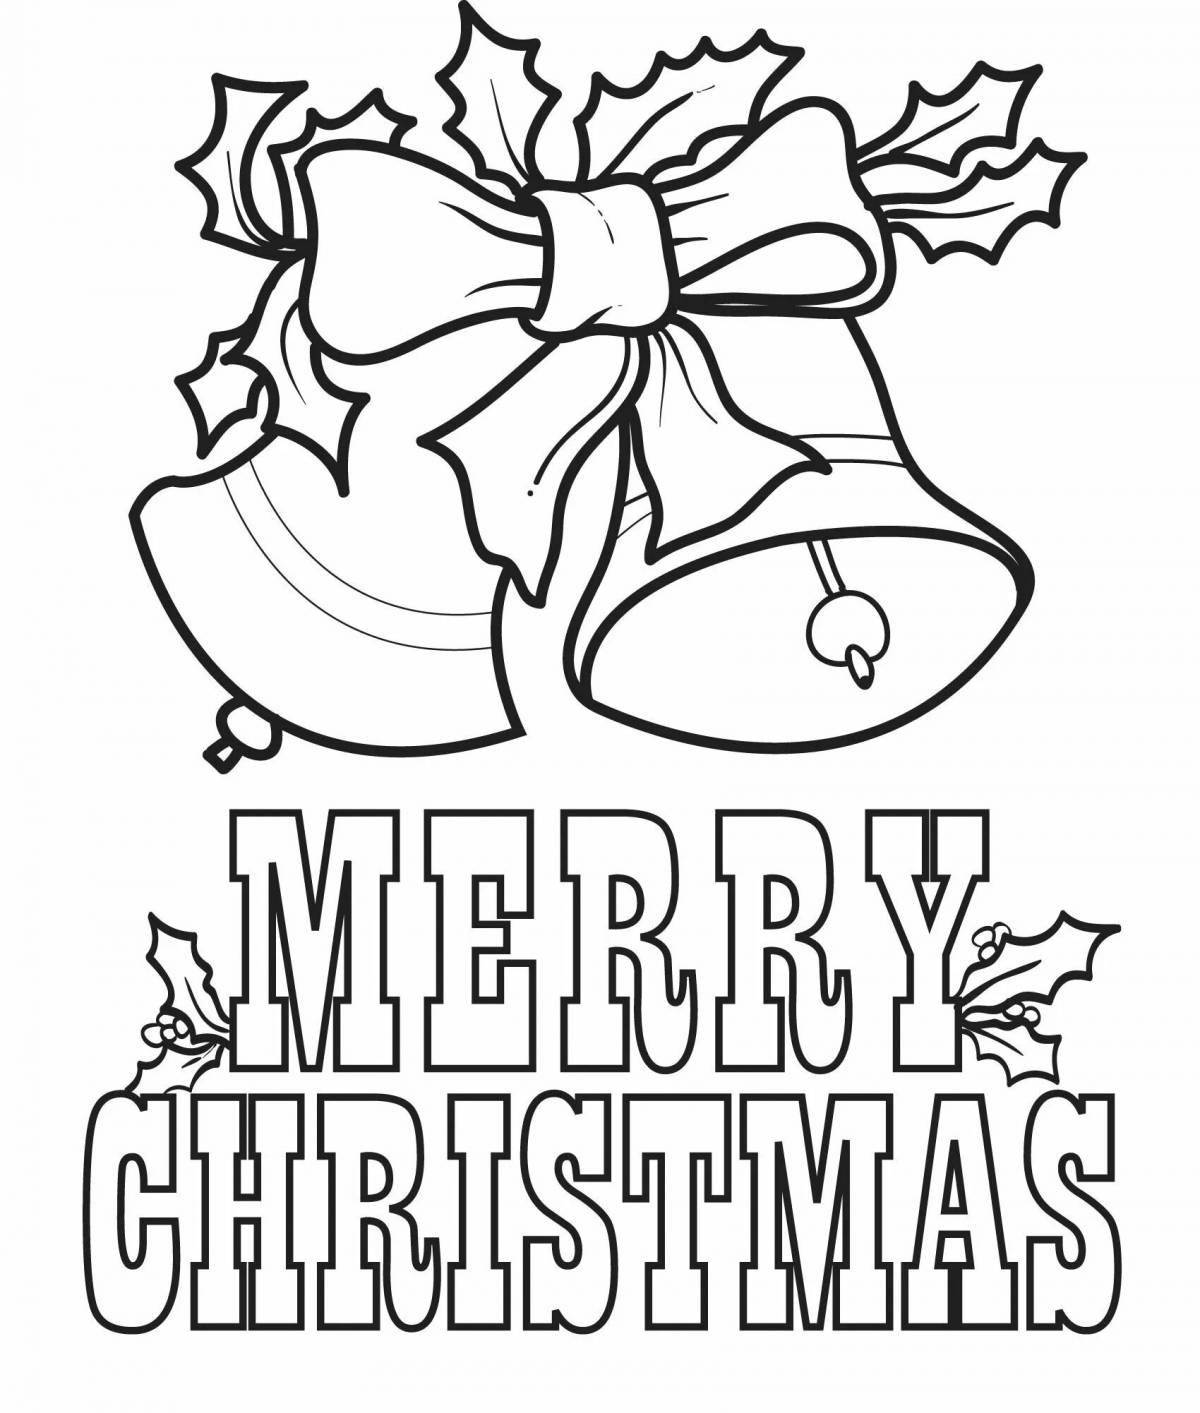 Exciting English Christmas coloring book